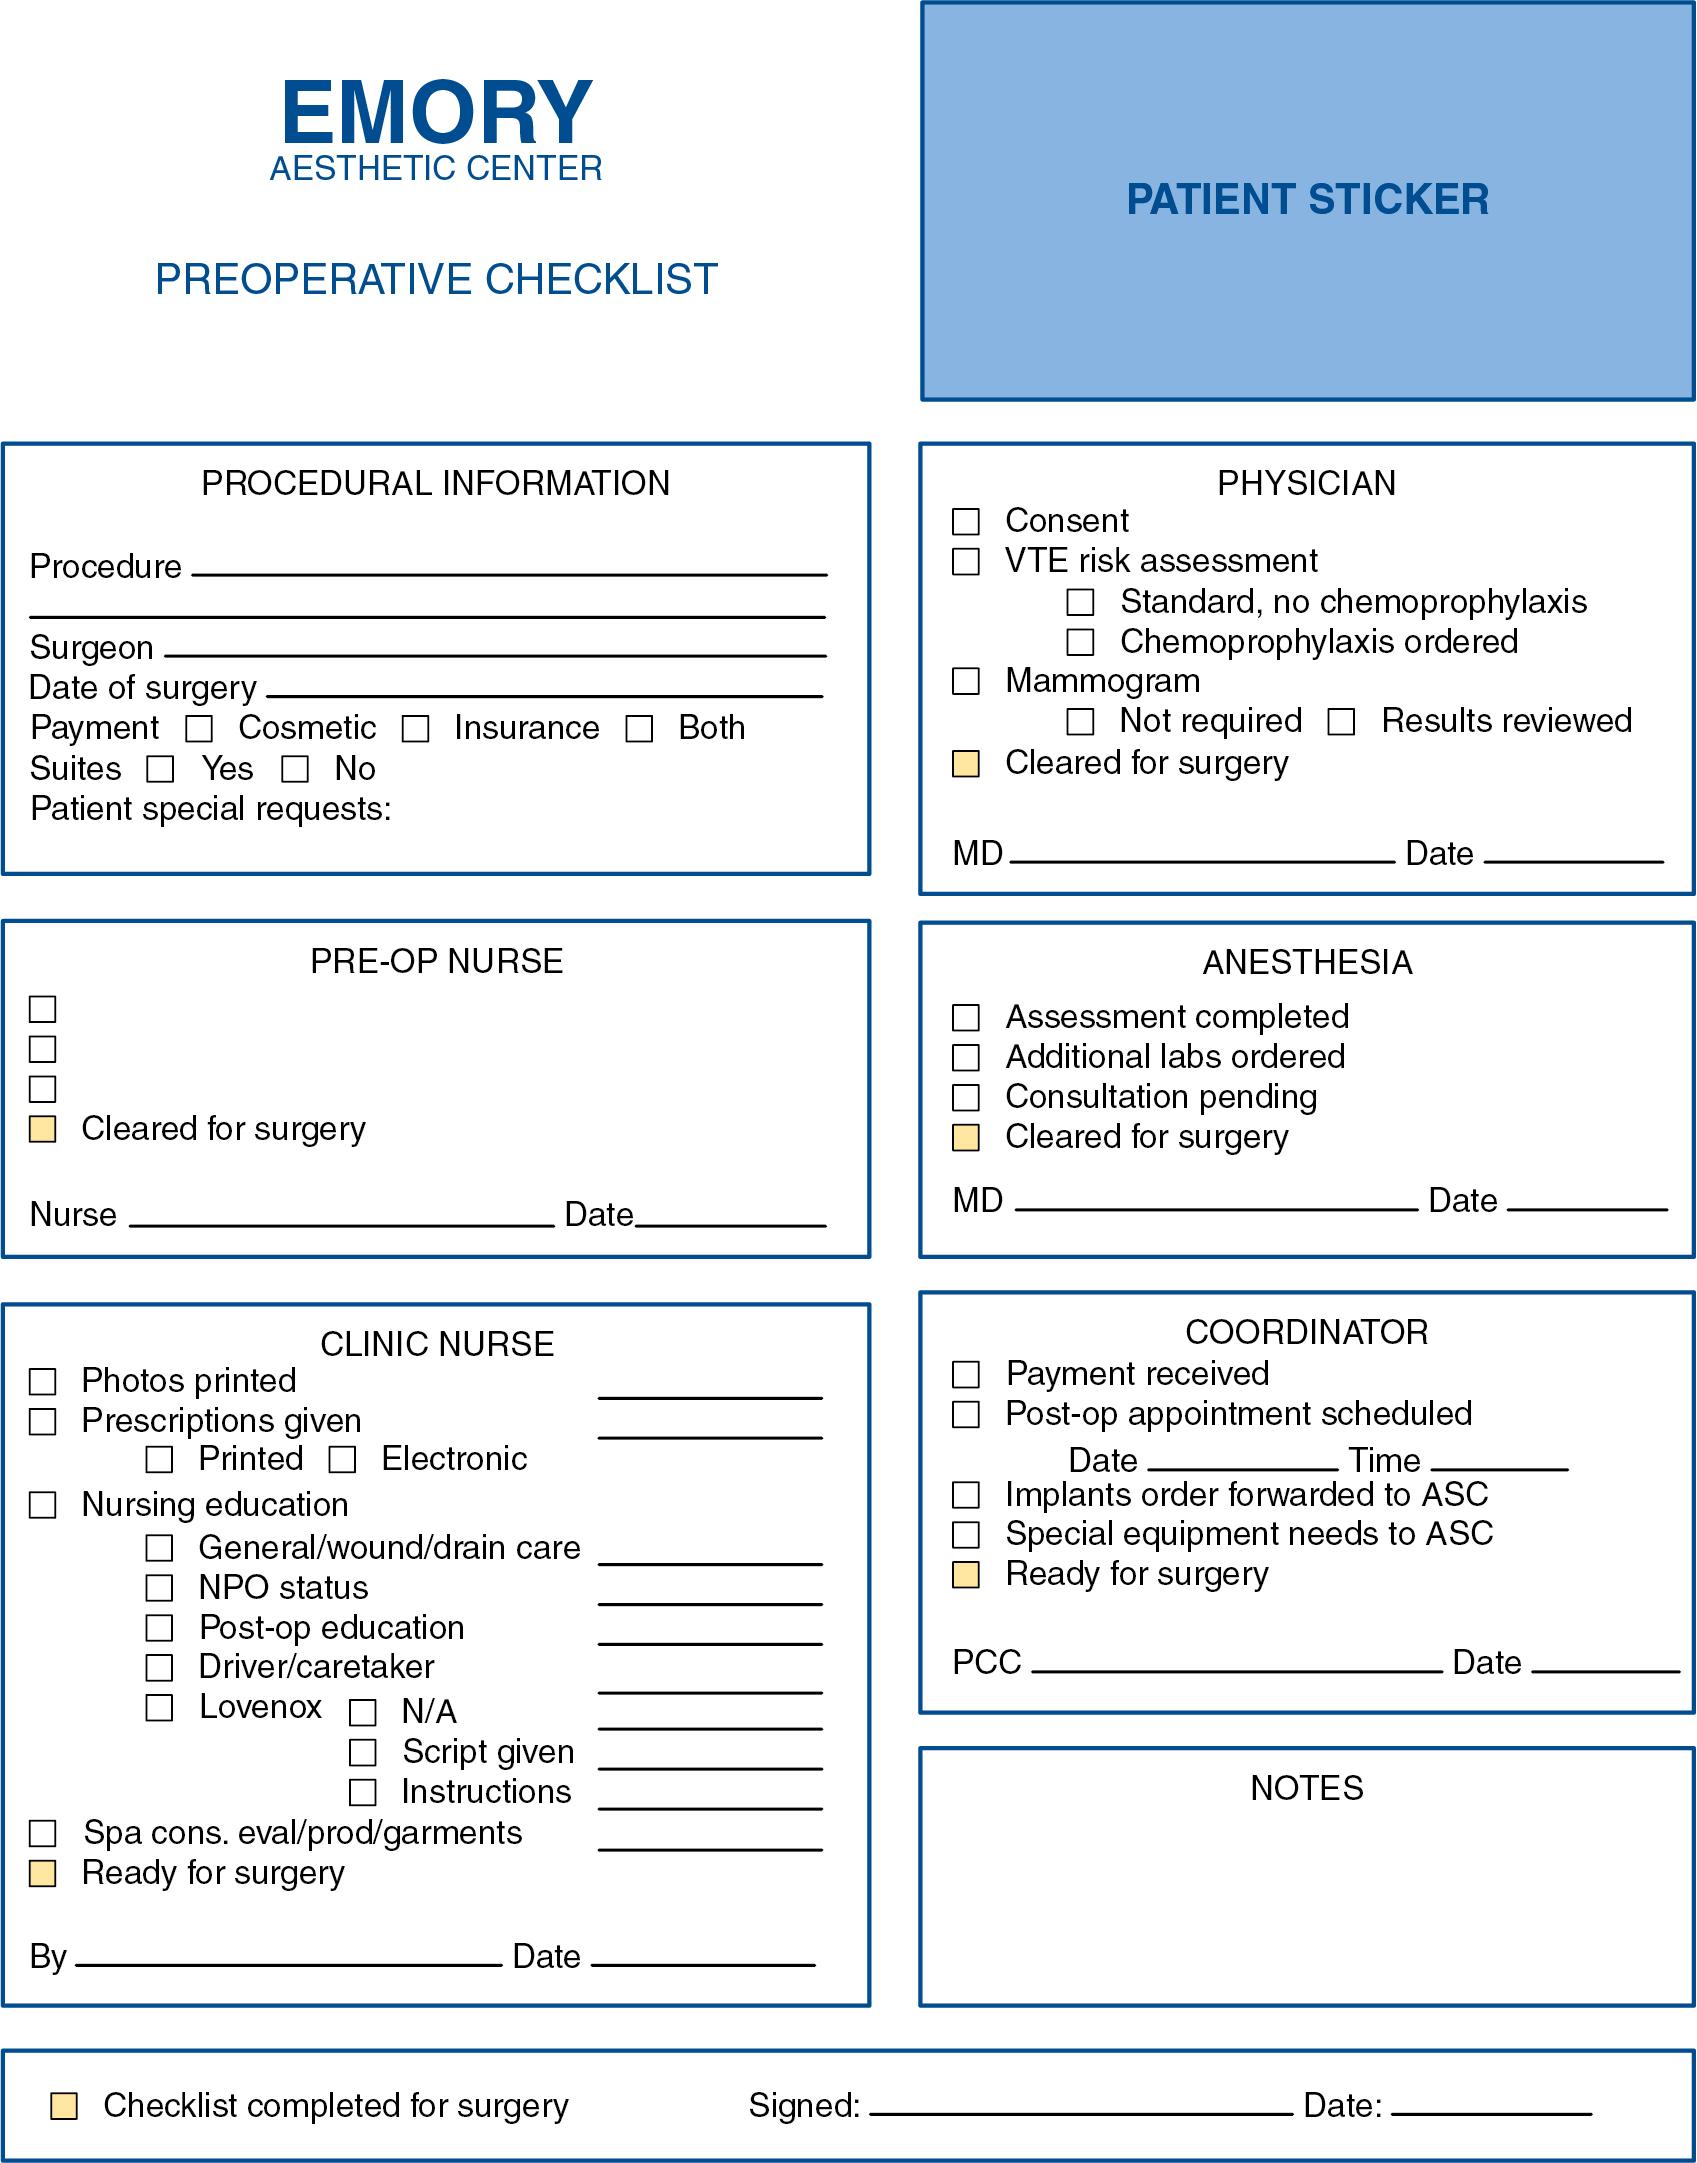 Fig. 34.4, The Emory Aesthetic Center preoperative checklist. This checklist is applied to all patients in a formal preoperative consultation 1 to 2 weeks before surgery, and it is a great example of integrating systems and processes for patient safety and practice management. 6